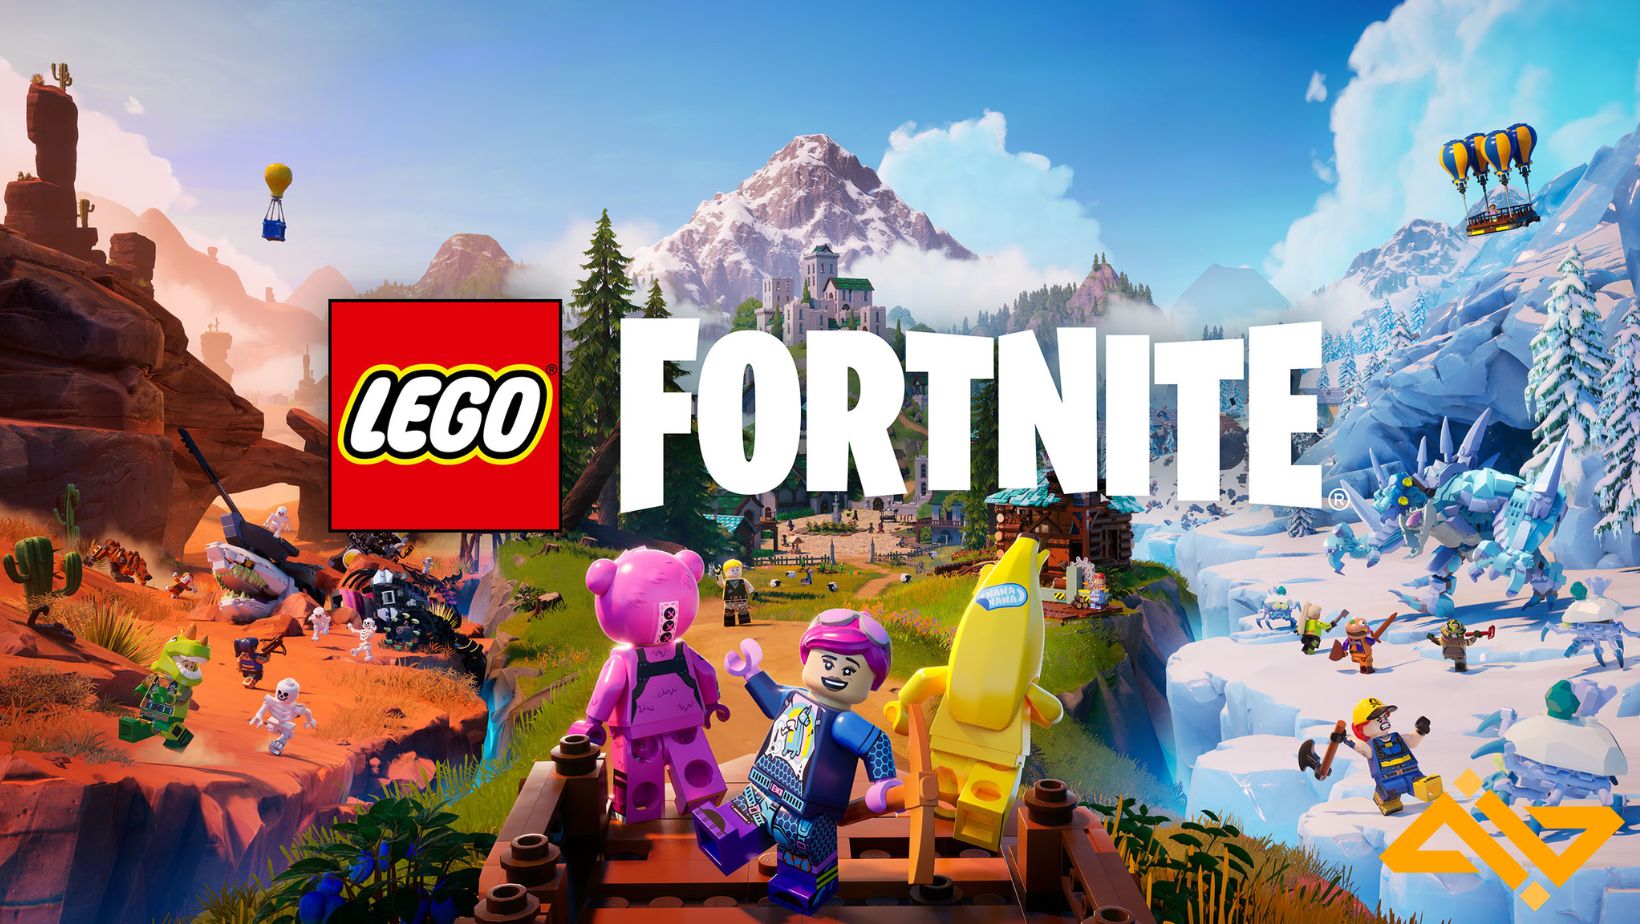 Lego Fortnite is still in its early stages but the game has shown a lot of promise